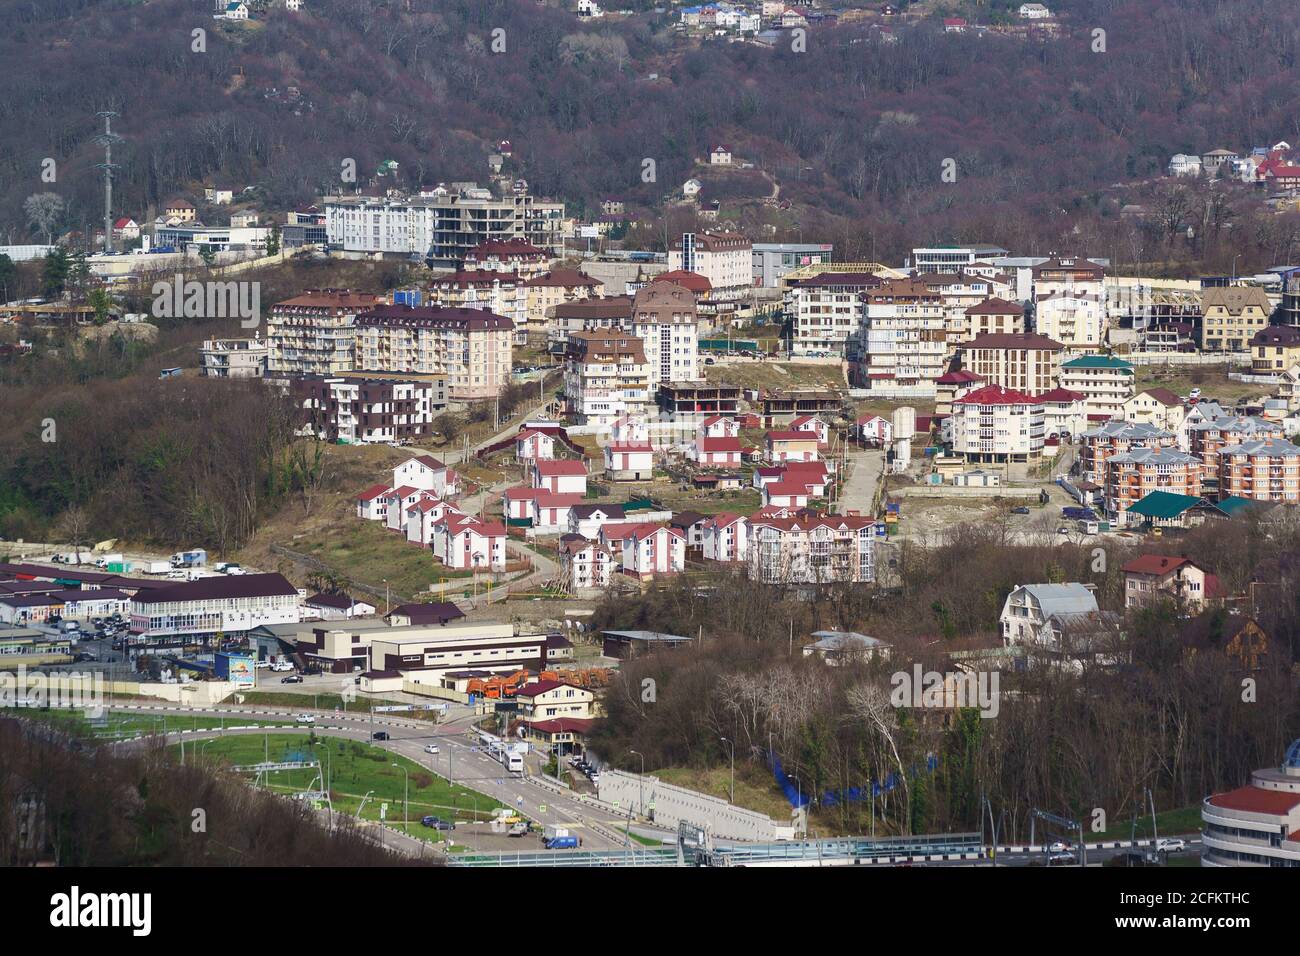 Russia, Krasnodarskiy Kray, Sochi - March 09.2018: top view of chaotic low-rise buildings in the area of Maly Ruchey resort town on a Sunny spring day Stock Photo